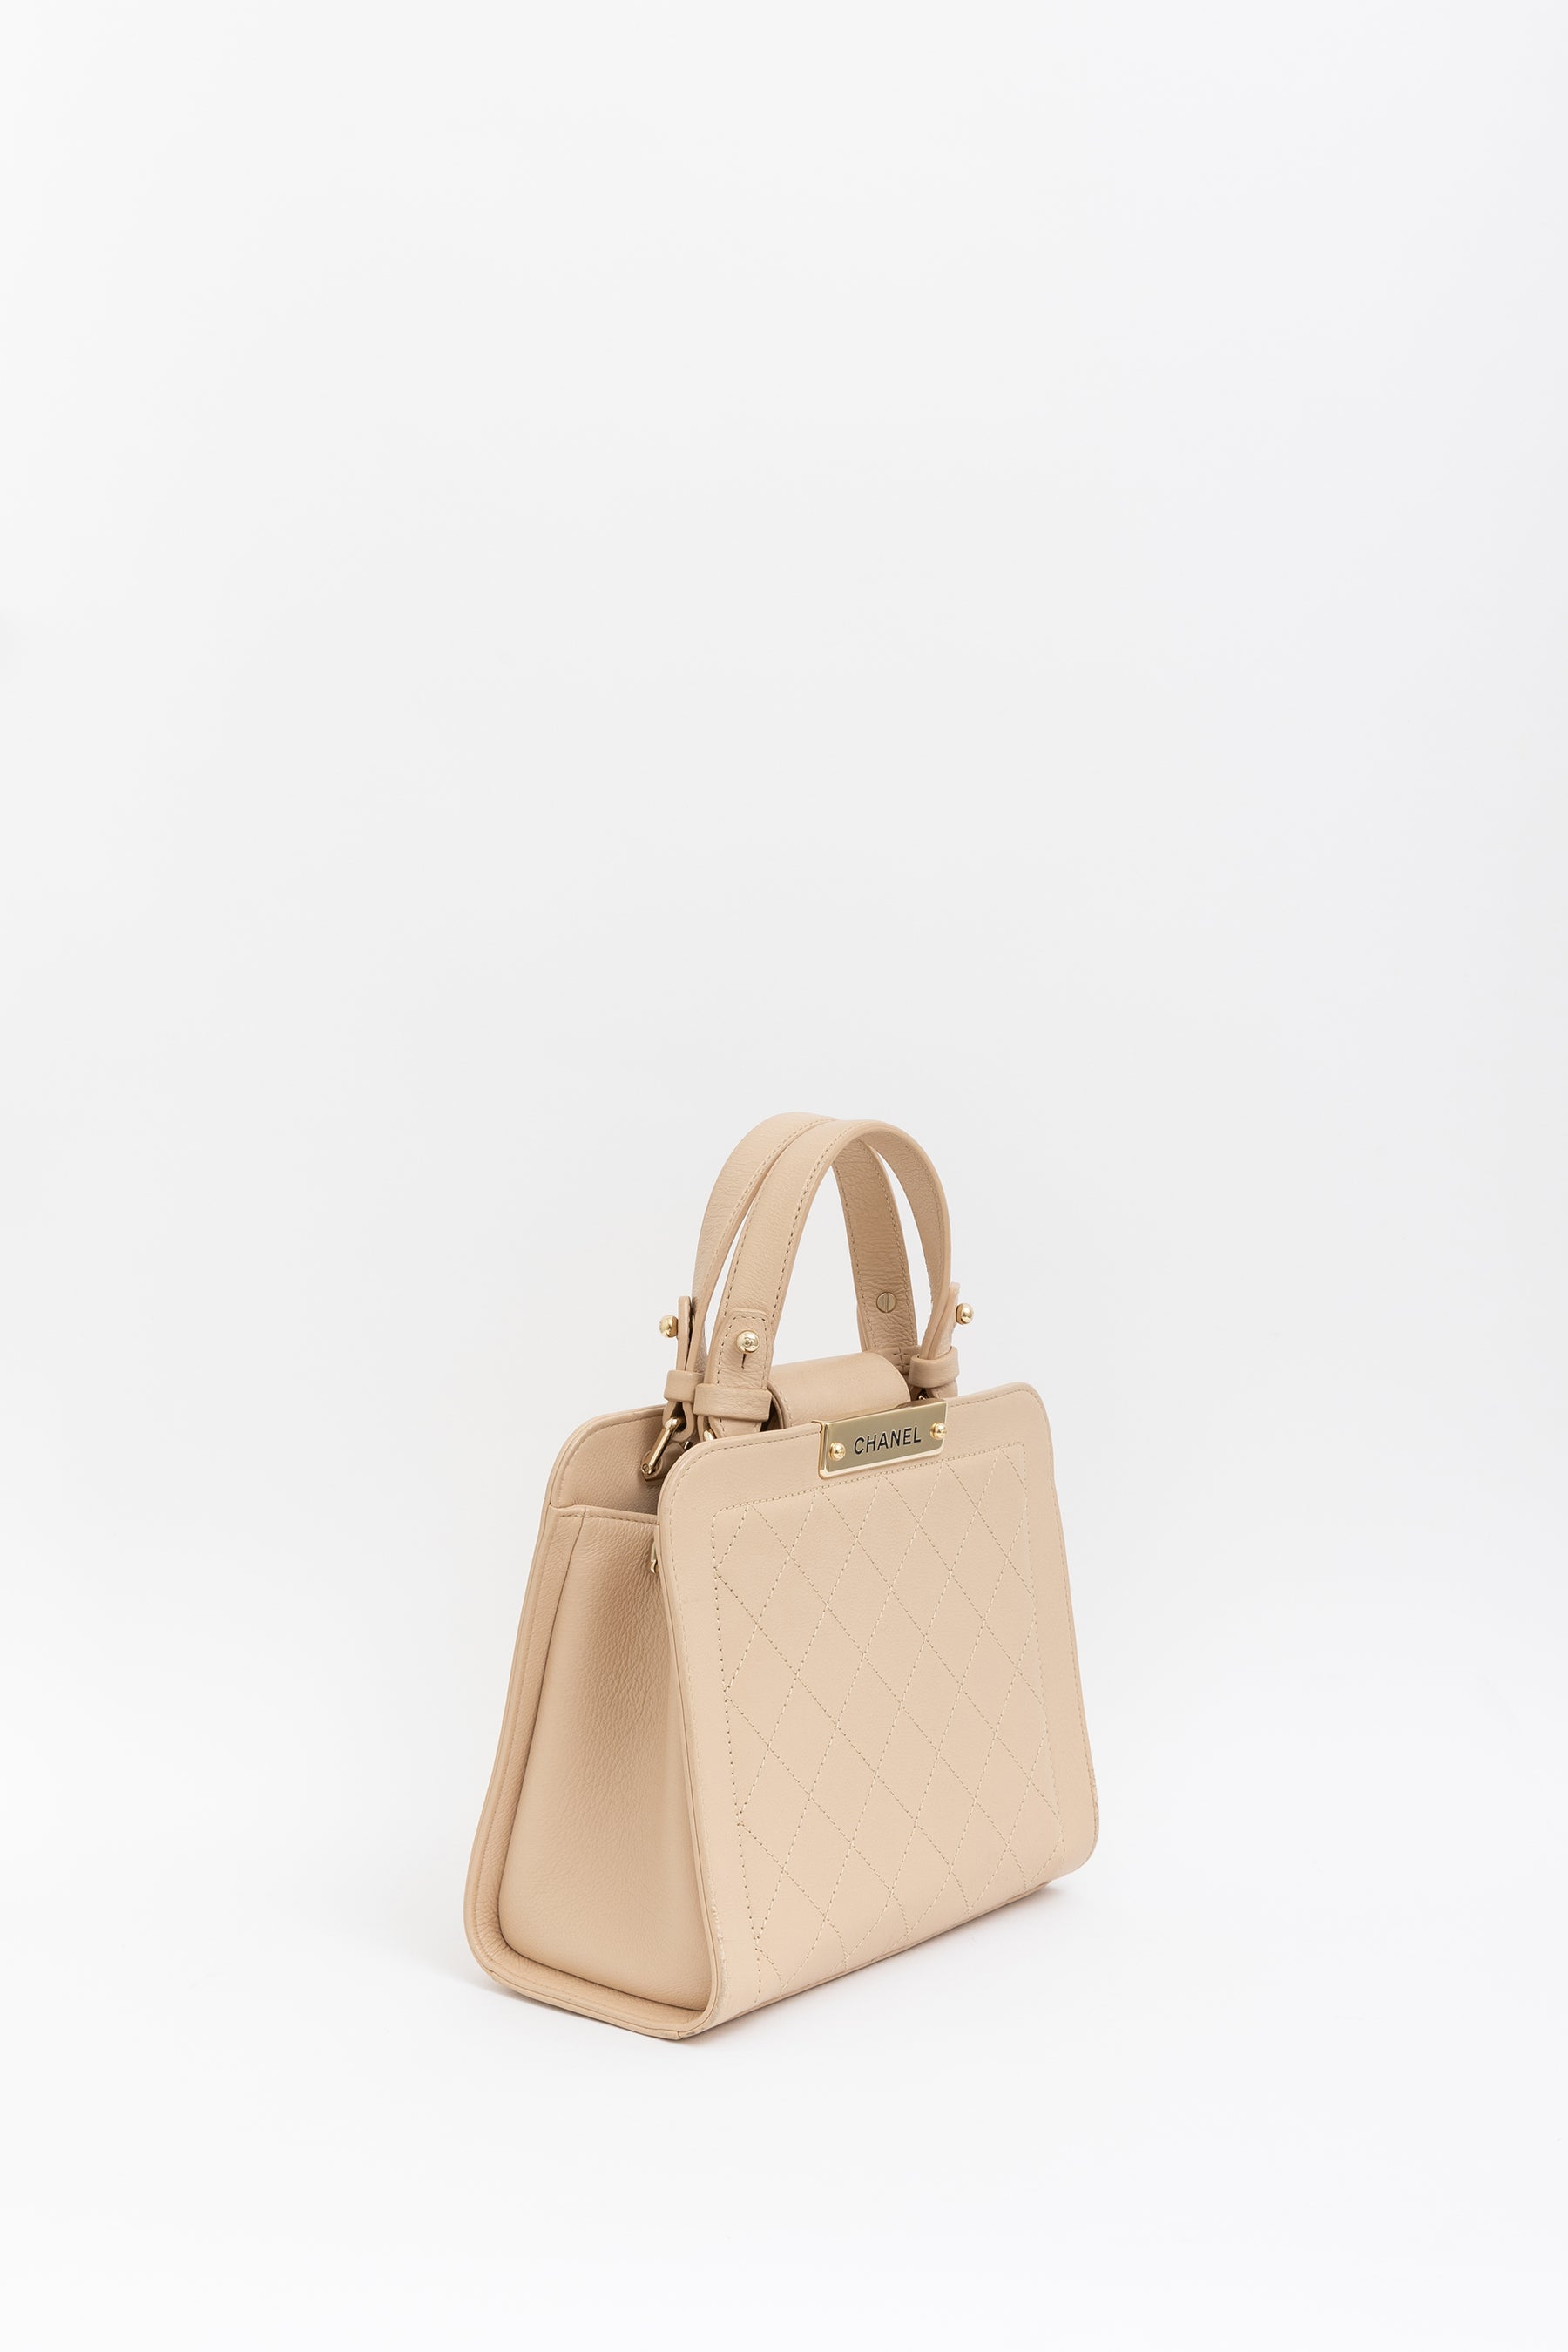 Label Click Shopping Tote Bag